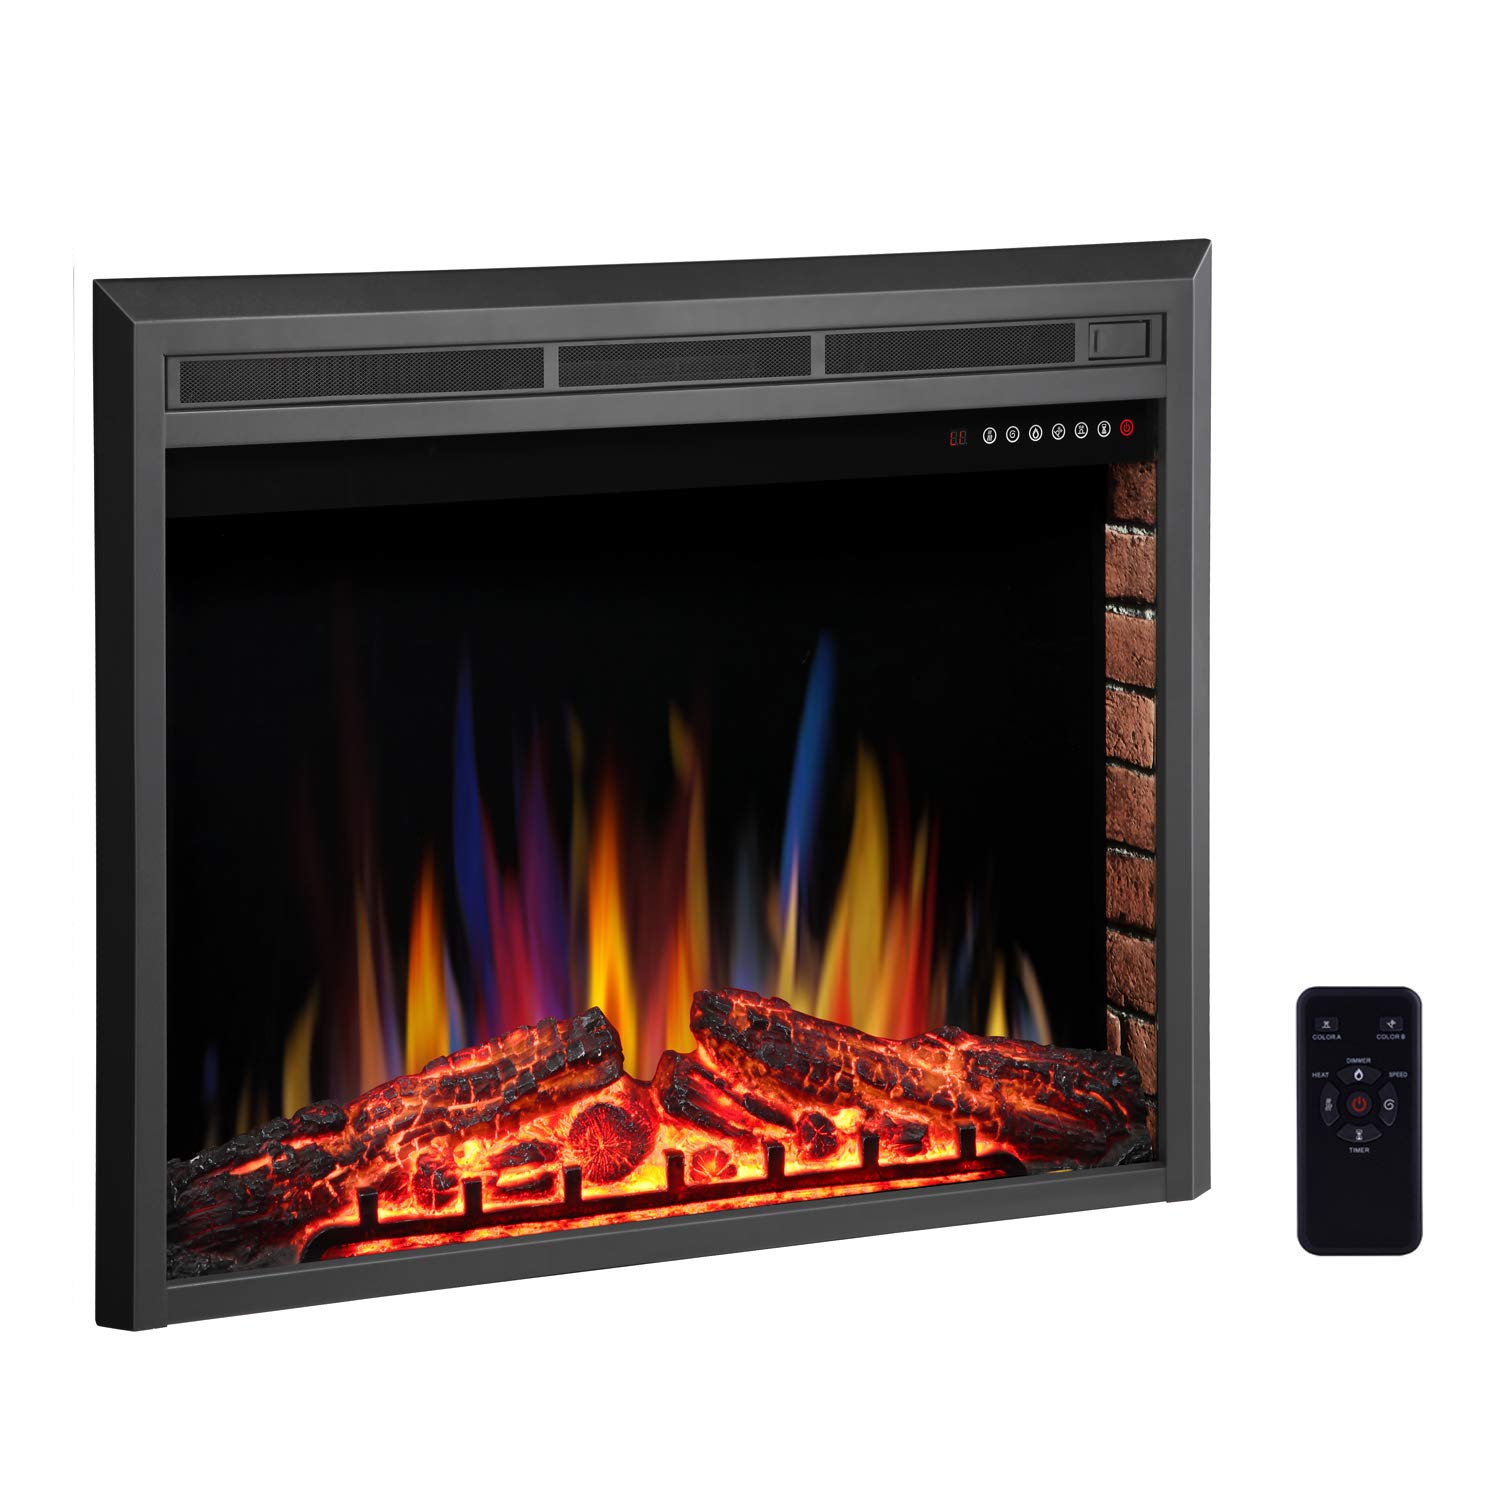 Wall Mount Electric Fireplace Insert Awesome Rwflame 28" Electric Fireplace Insert Freestanding & Recessed Electric Stove Heater touch Screen Remote Control 750w 1500w with Timer & Colorful Flame